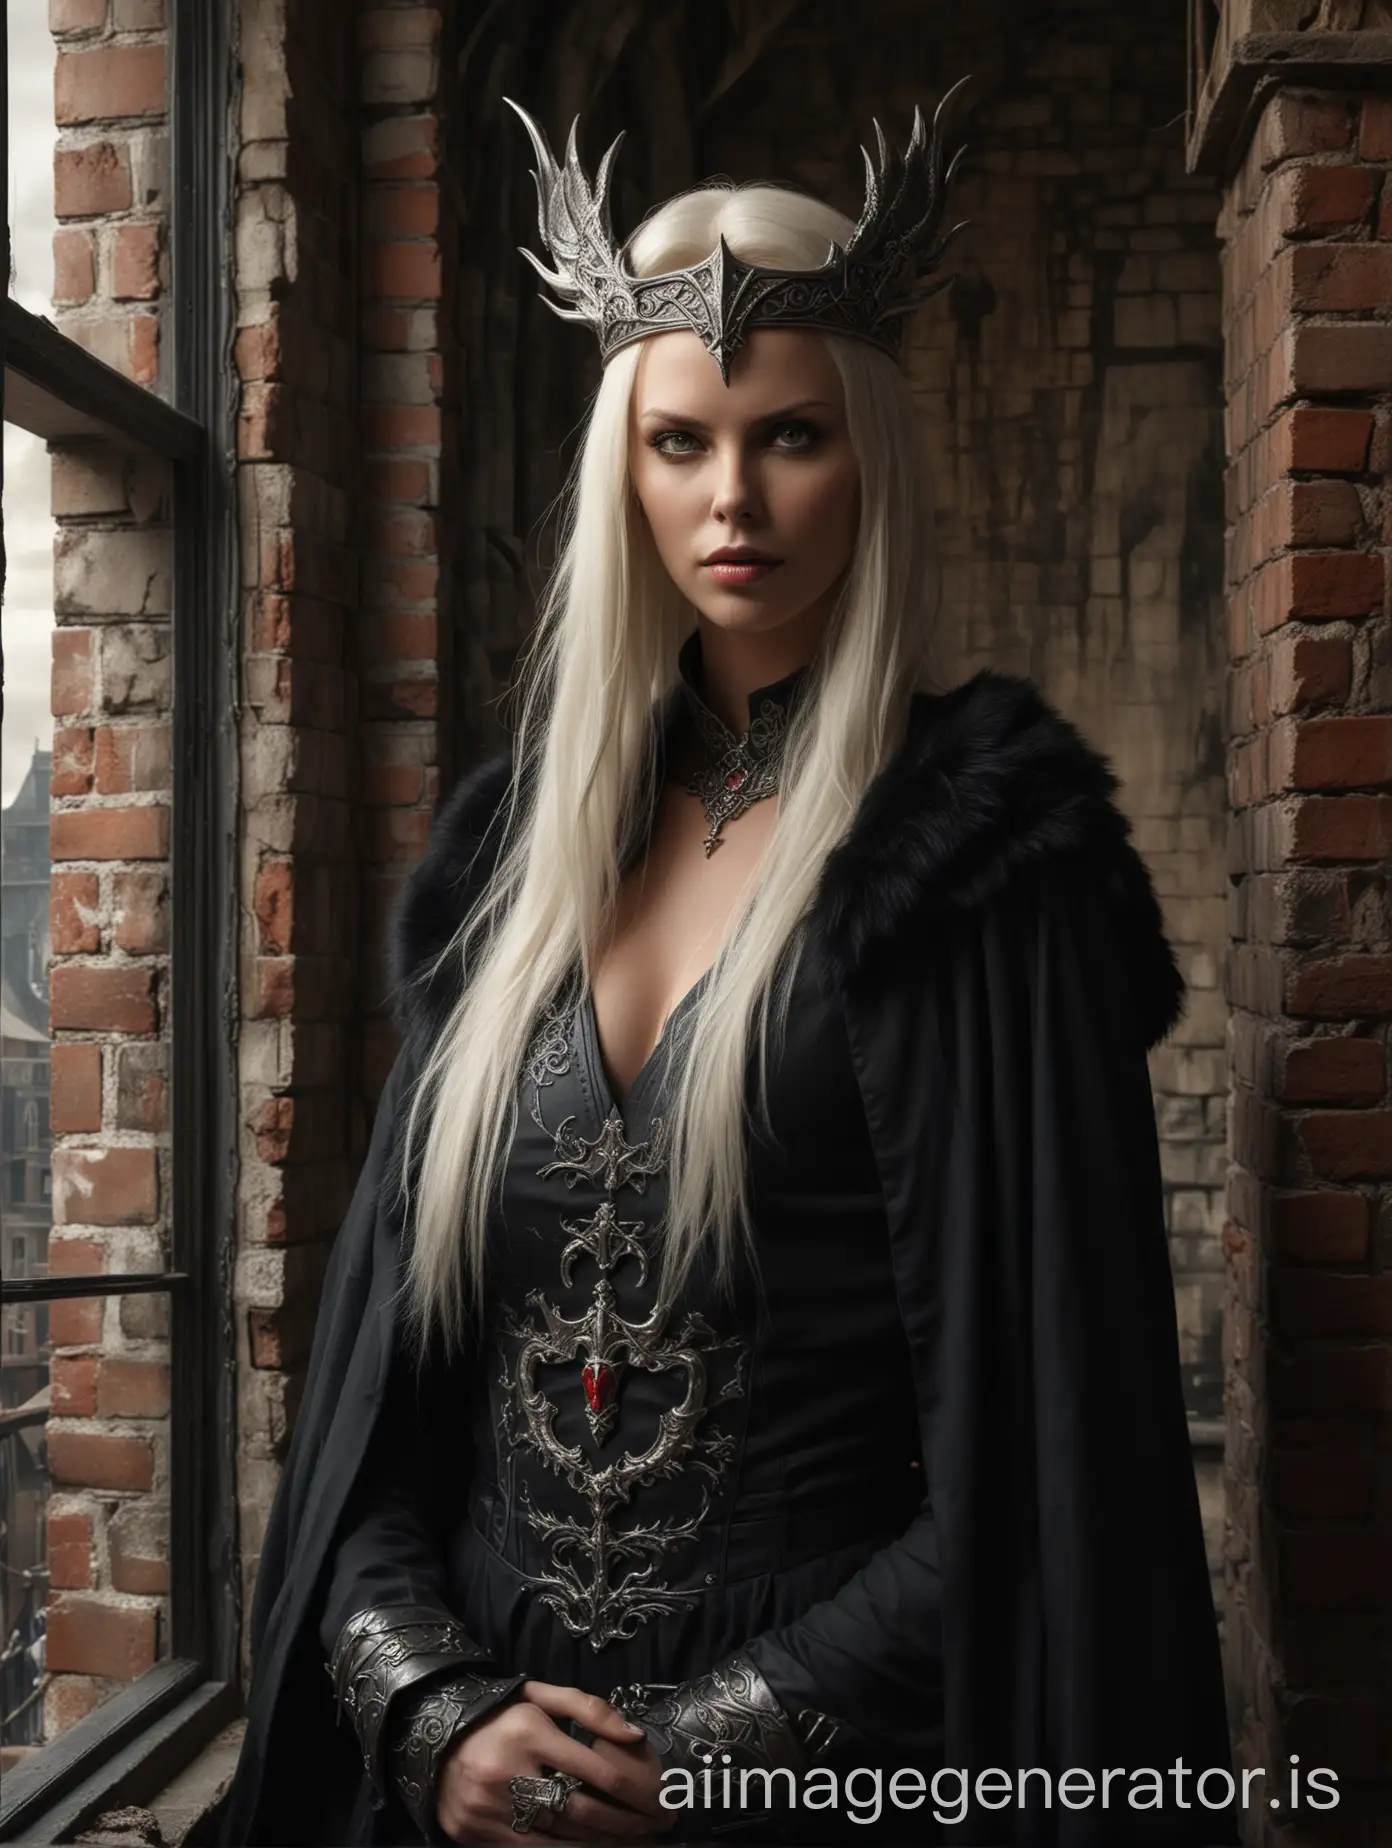 Viking-Queen-with-Dragon-Crest-Crown-in-Ancient-Cityscape